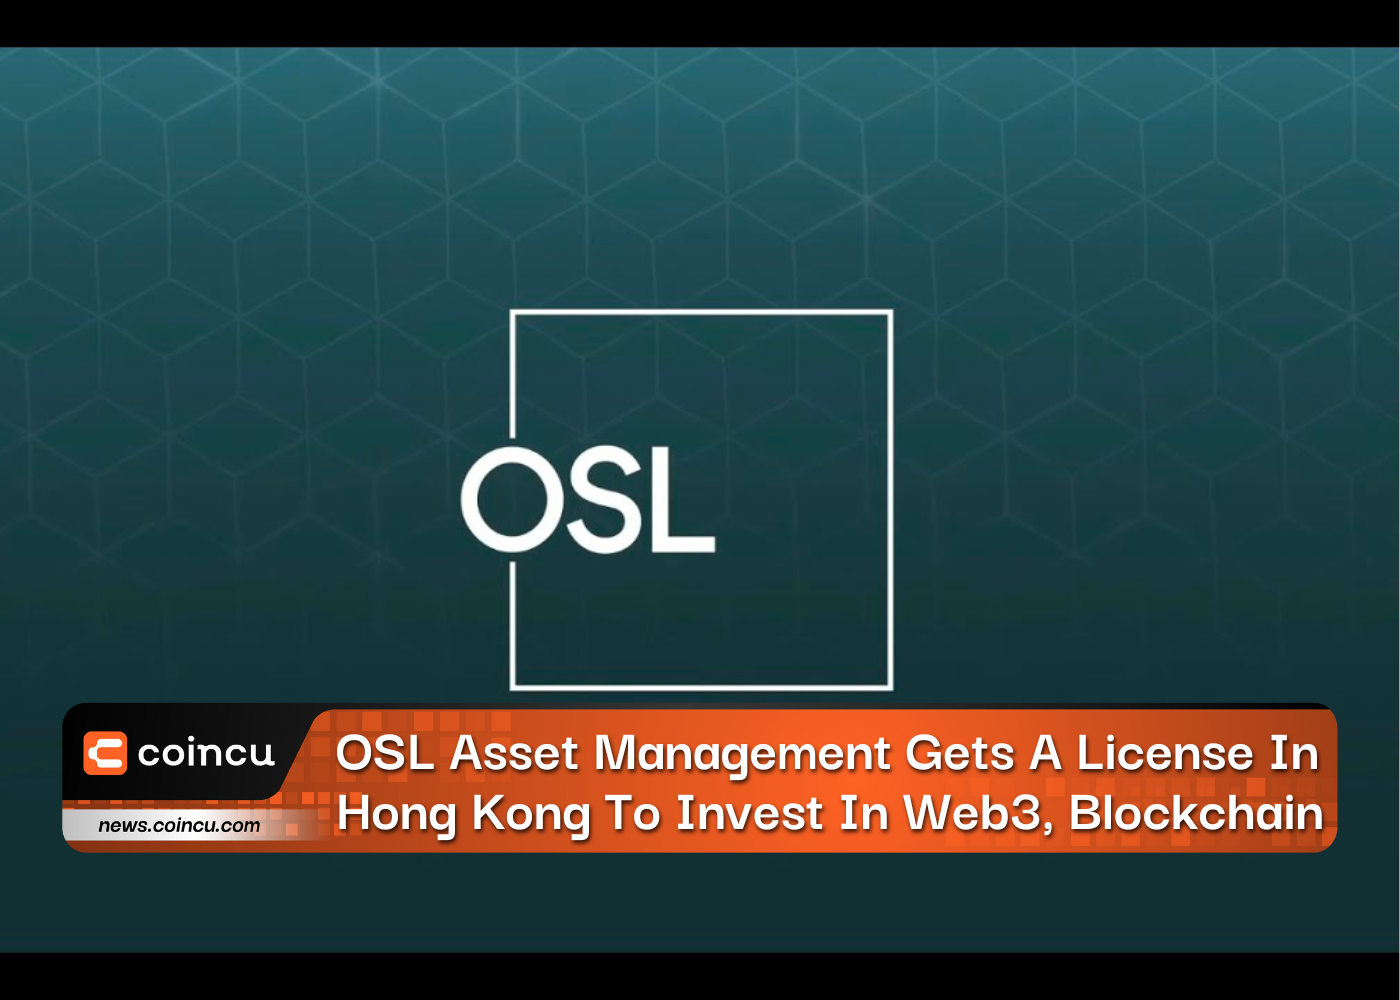 OSL Asset Management Gets A License In Hong Kong To Invest In Web3, Blockchain